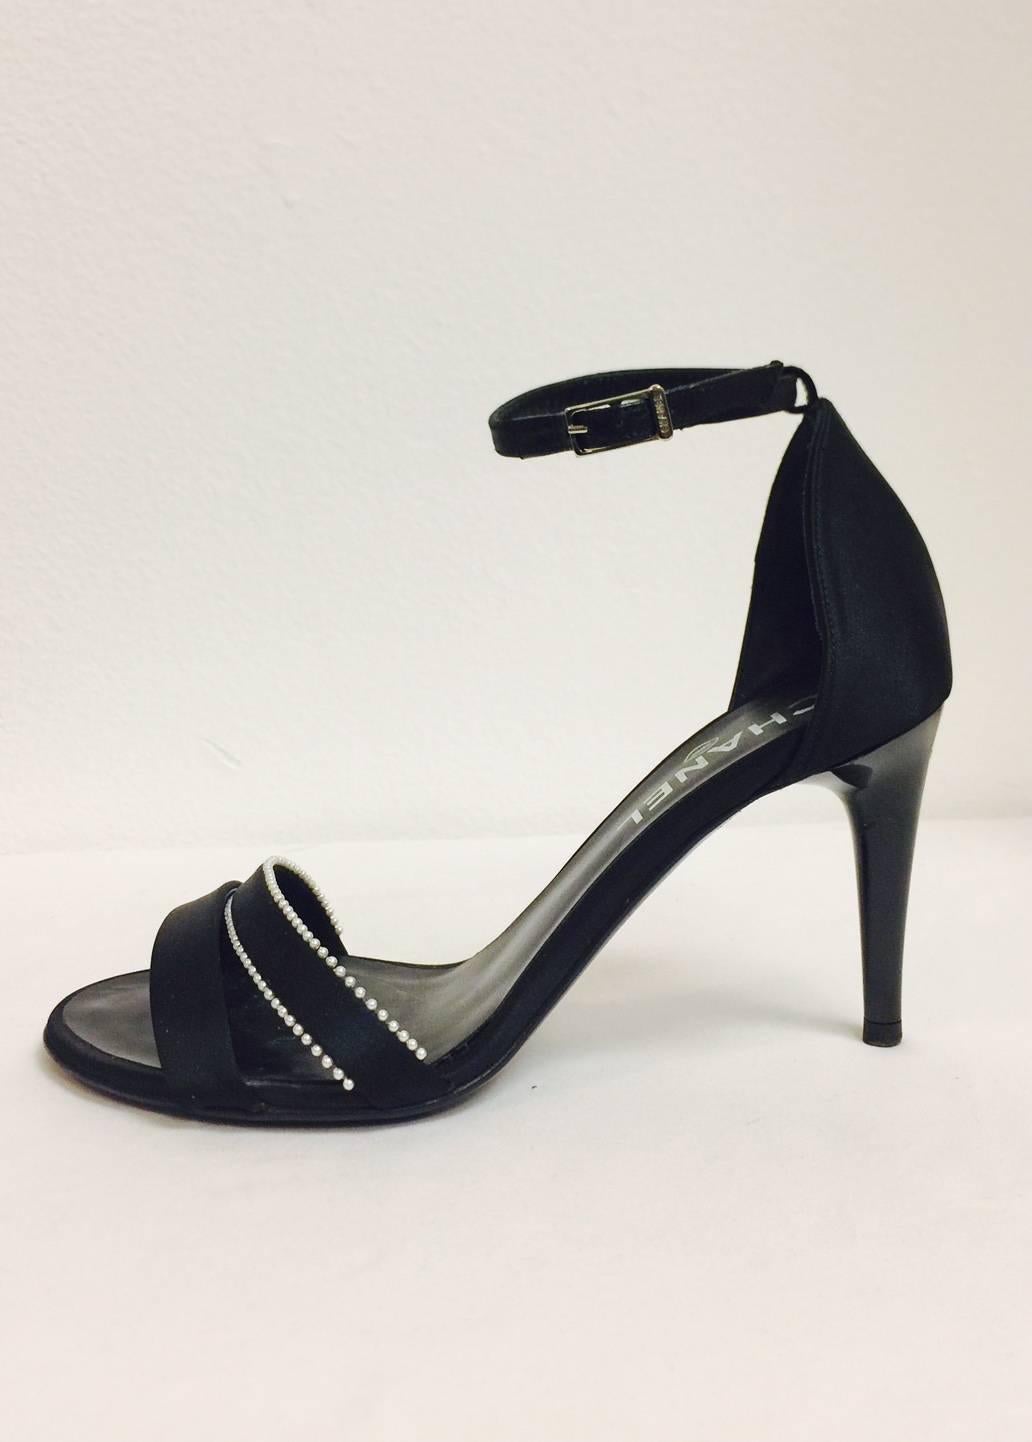 Chanel Strappy High Heel Sandals are perfect for "Dinner and Dancing"!  Features ultra-luxurious black satin bands across the vamps and adjustable ankle straps with logo buckles.  Black satin counters and leather soles/insoles. Black shiny